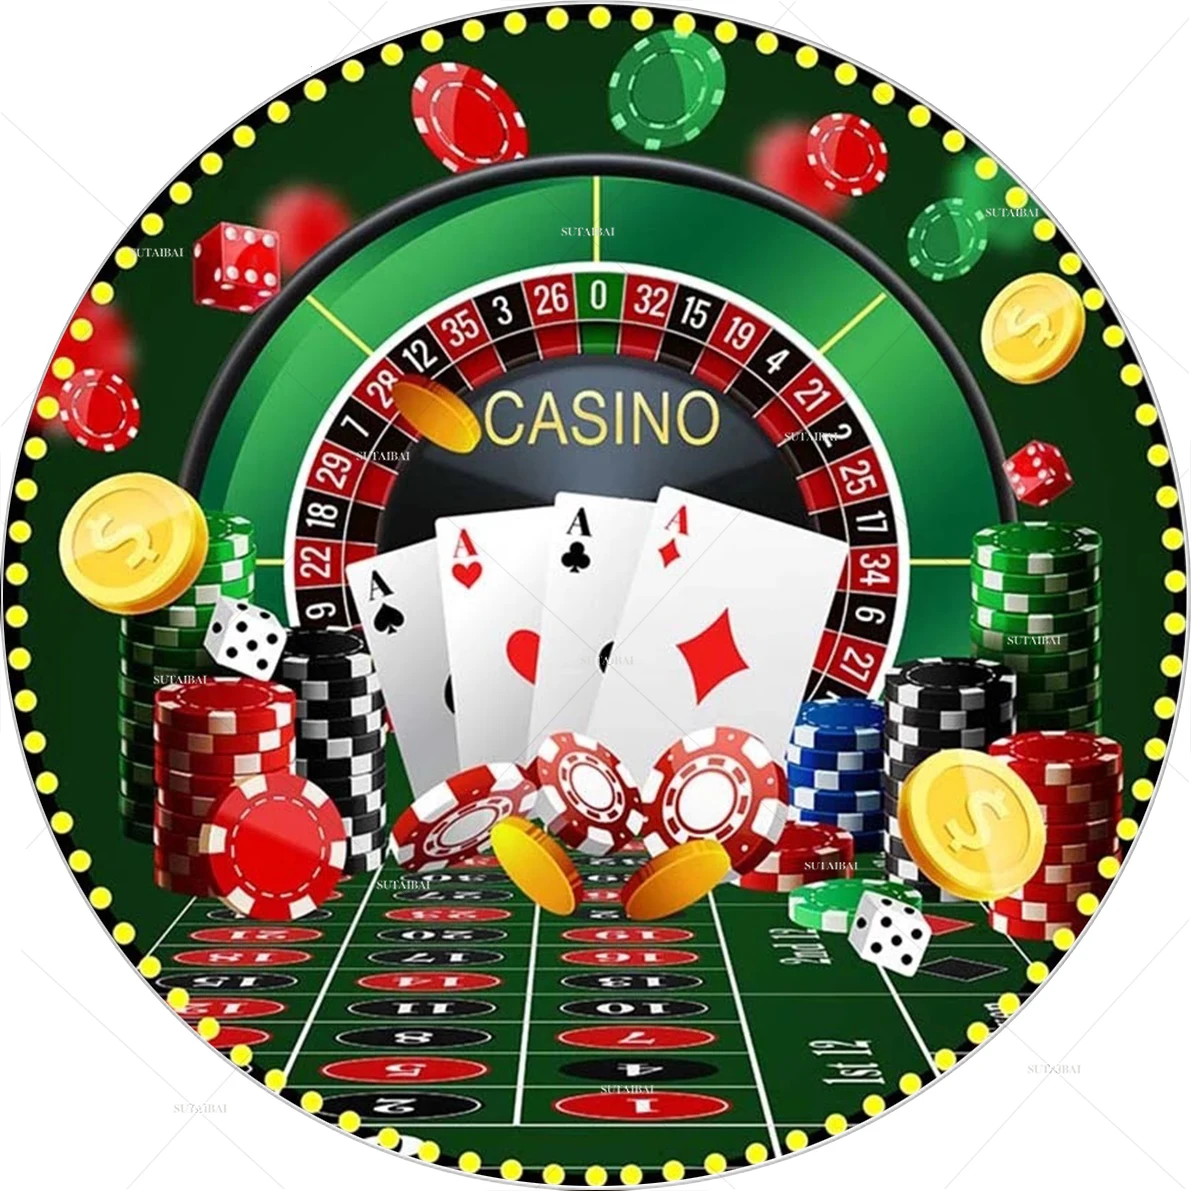 

Casino Night Circle Photo Background Cover Las Vegas Birthday Party Round Photography Backdrop Poker Dice Colored Chips Decor